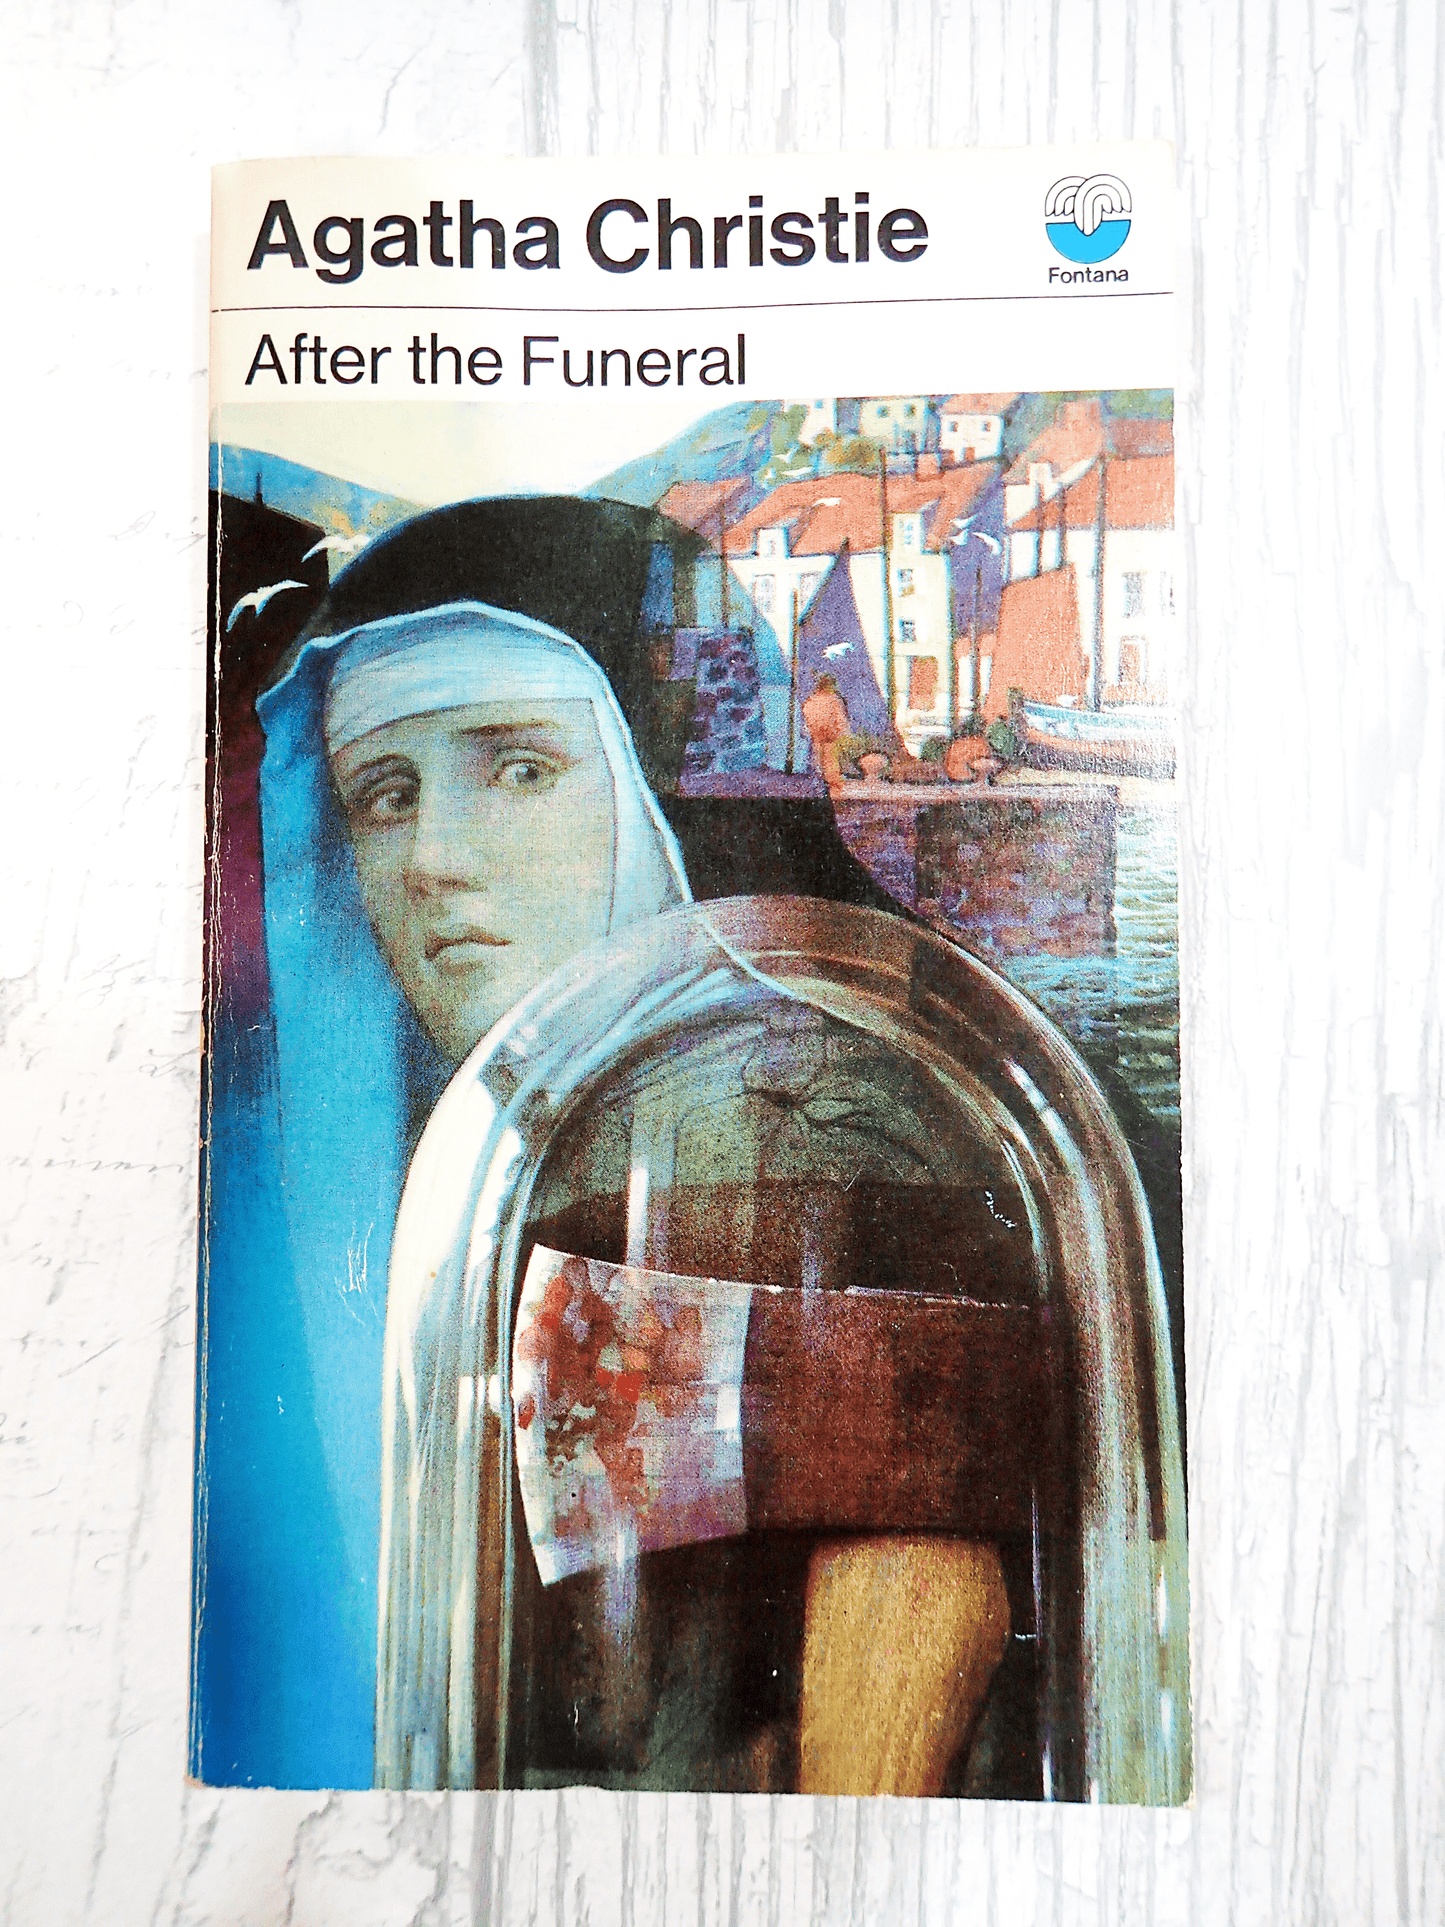 Front cover of After the Funeral by Agatha Christie Vintage Paperback Book Crime Classic 1970's, showing a Nun with an axe against a setting of quaint cottages on a light background. 